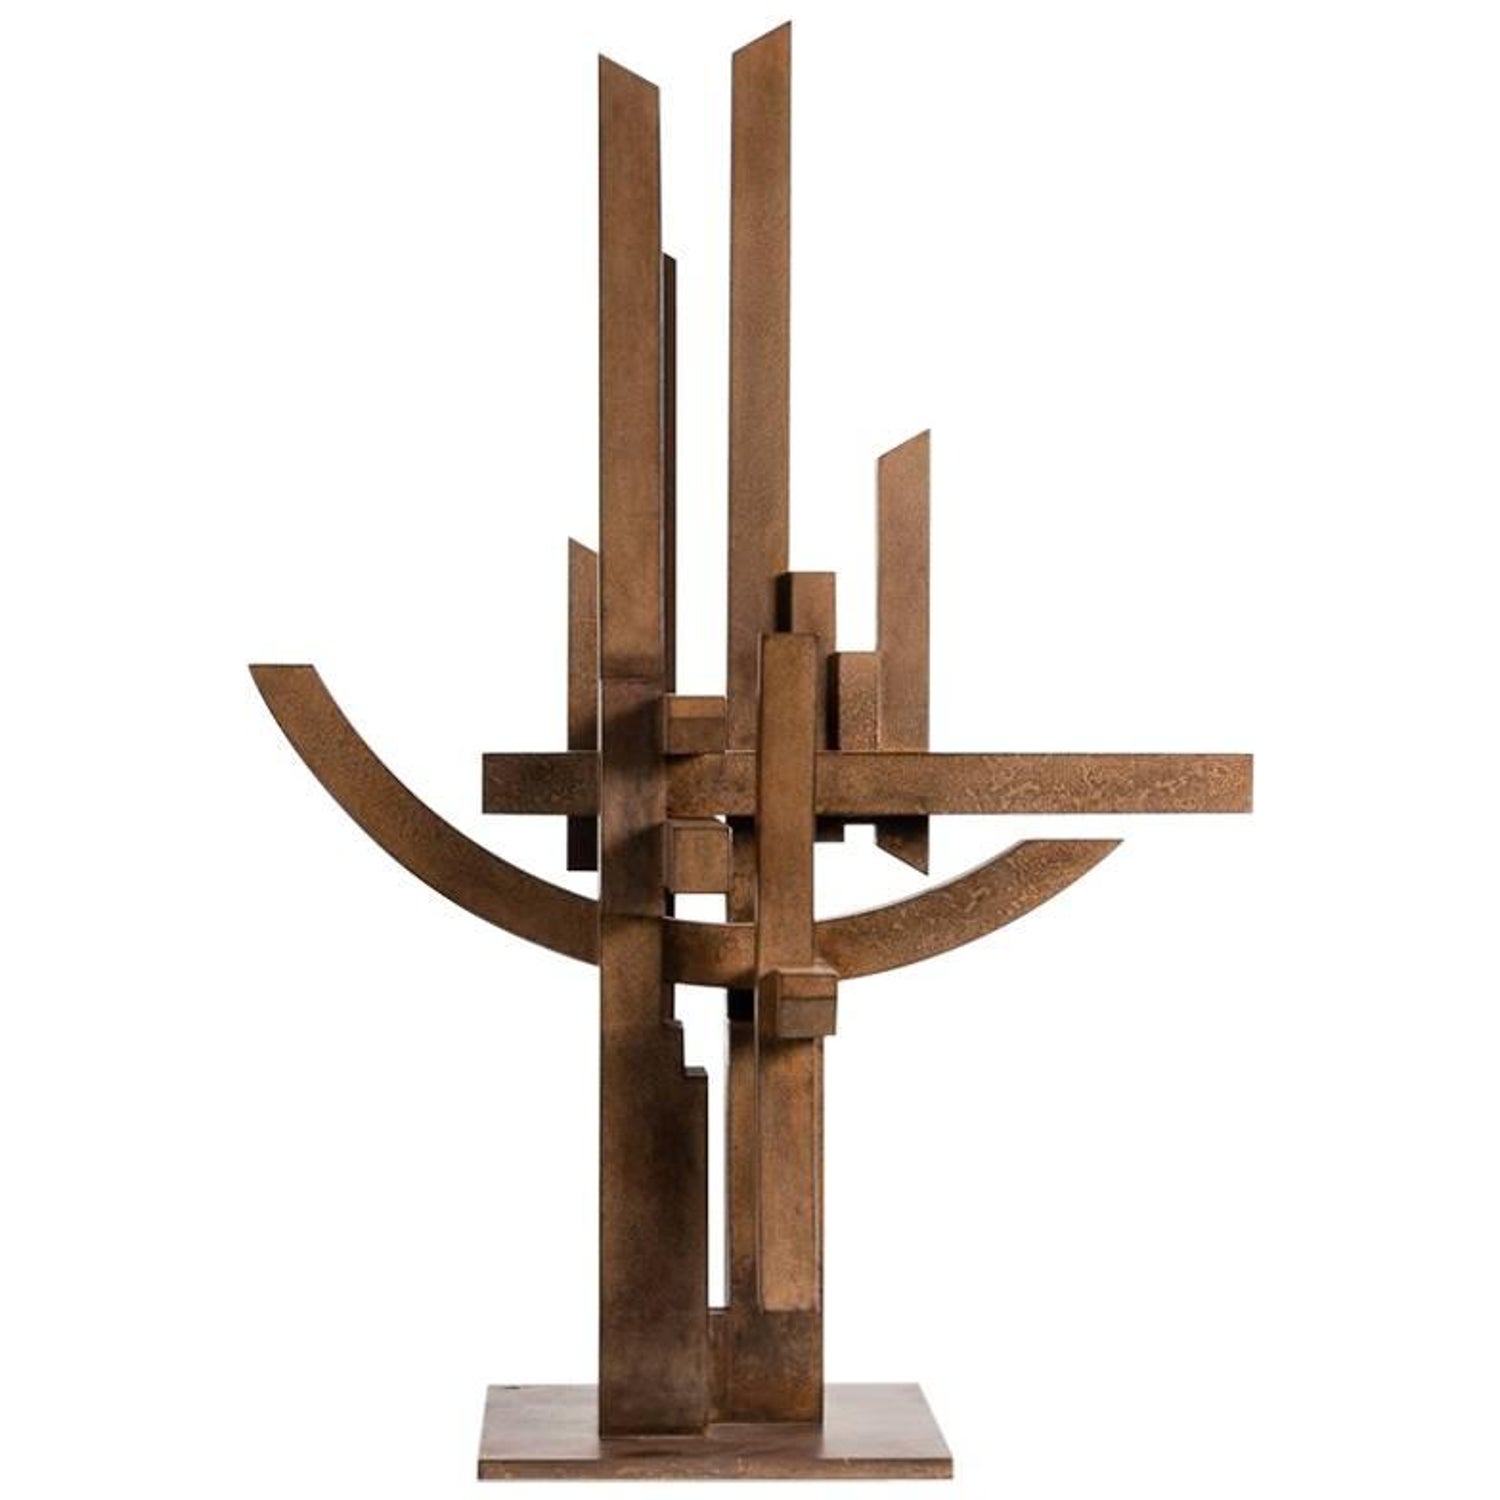 Marino Di Teana, Hommage Aux Sciences, "Nancy", Sculpture, France, 1978 For  Sale at 1stDibs